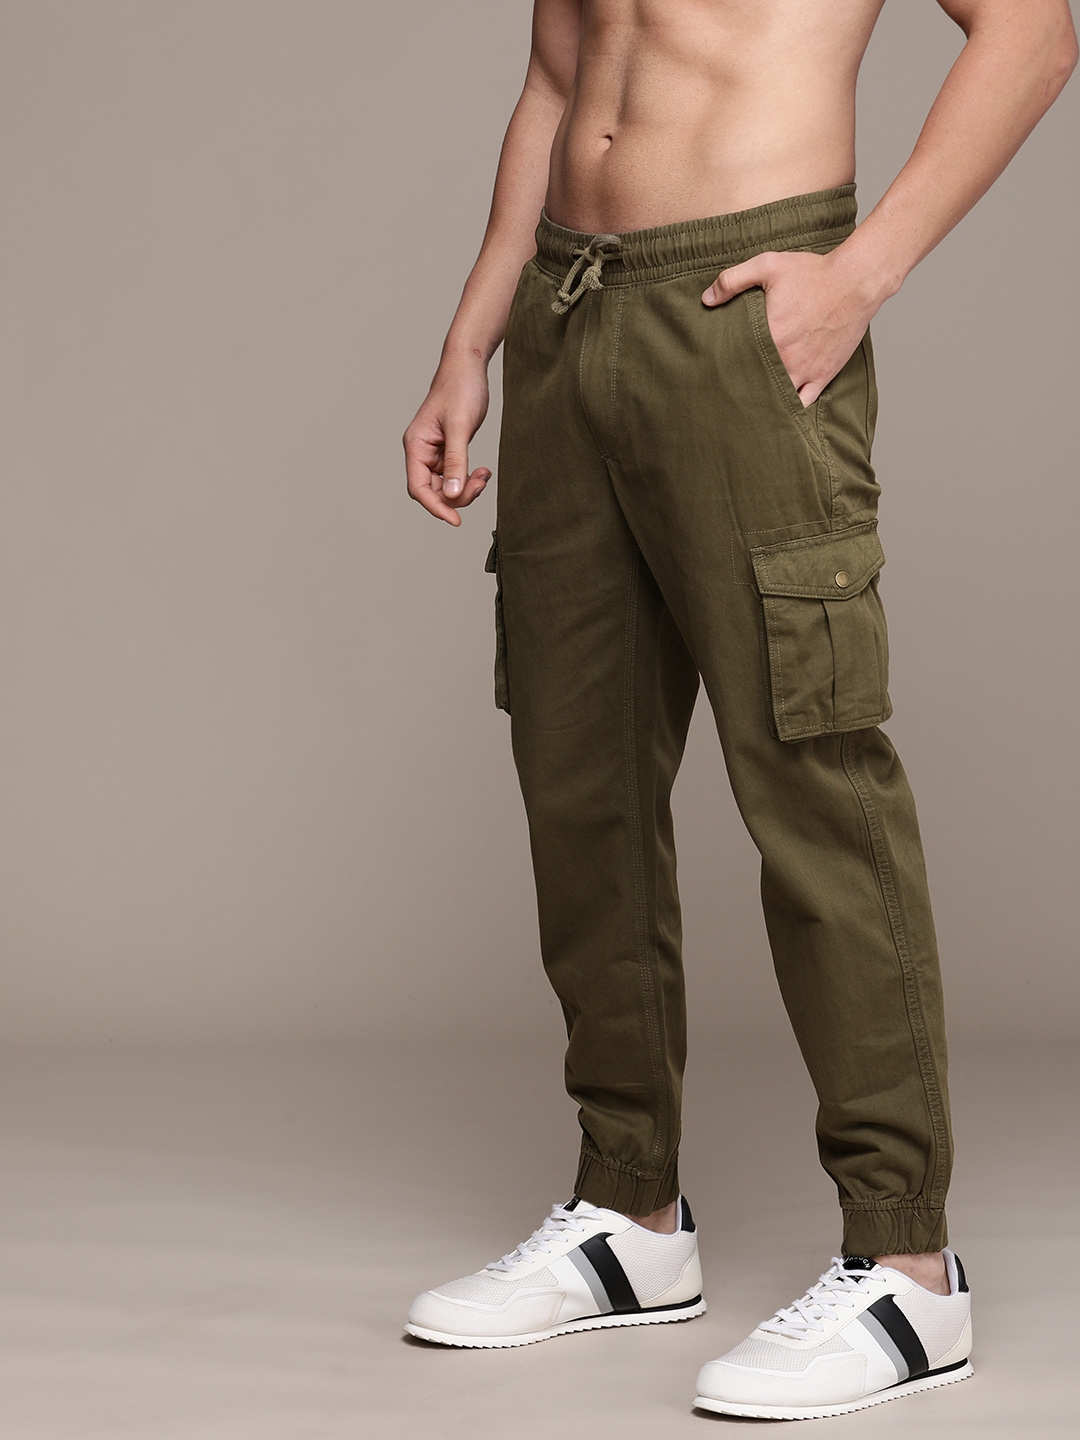 Buy The Roadster Lifestyle Co. Men Pure Cotton Cargo Joggers